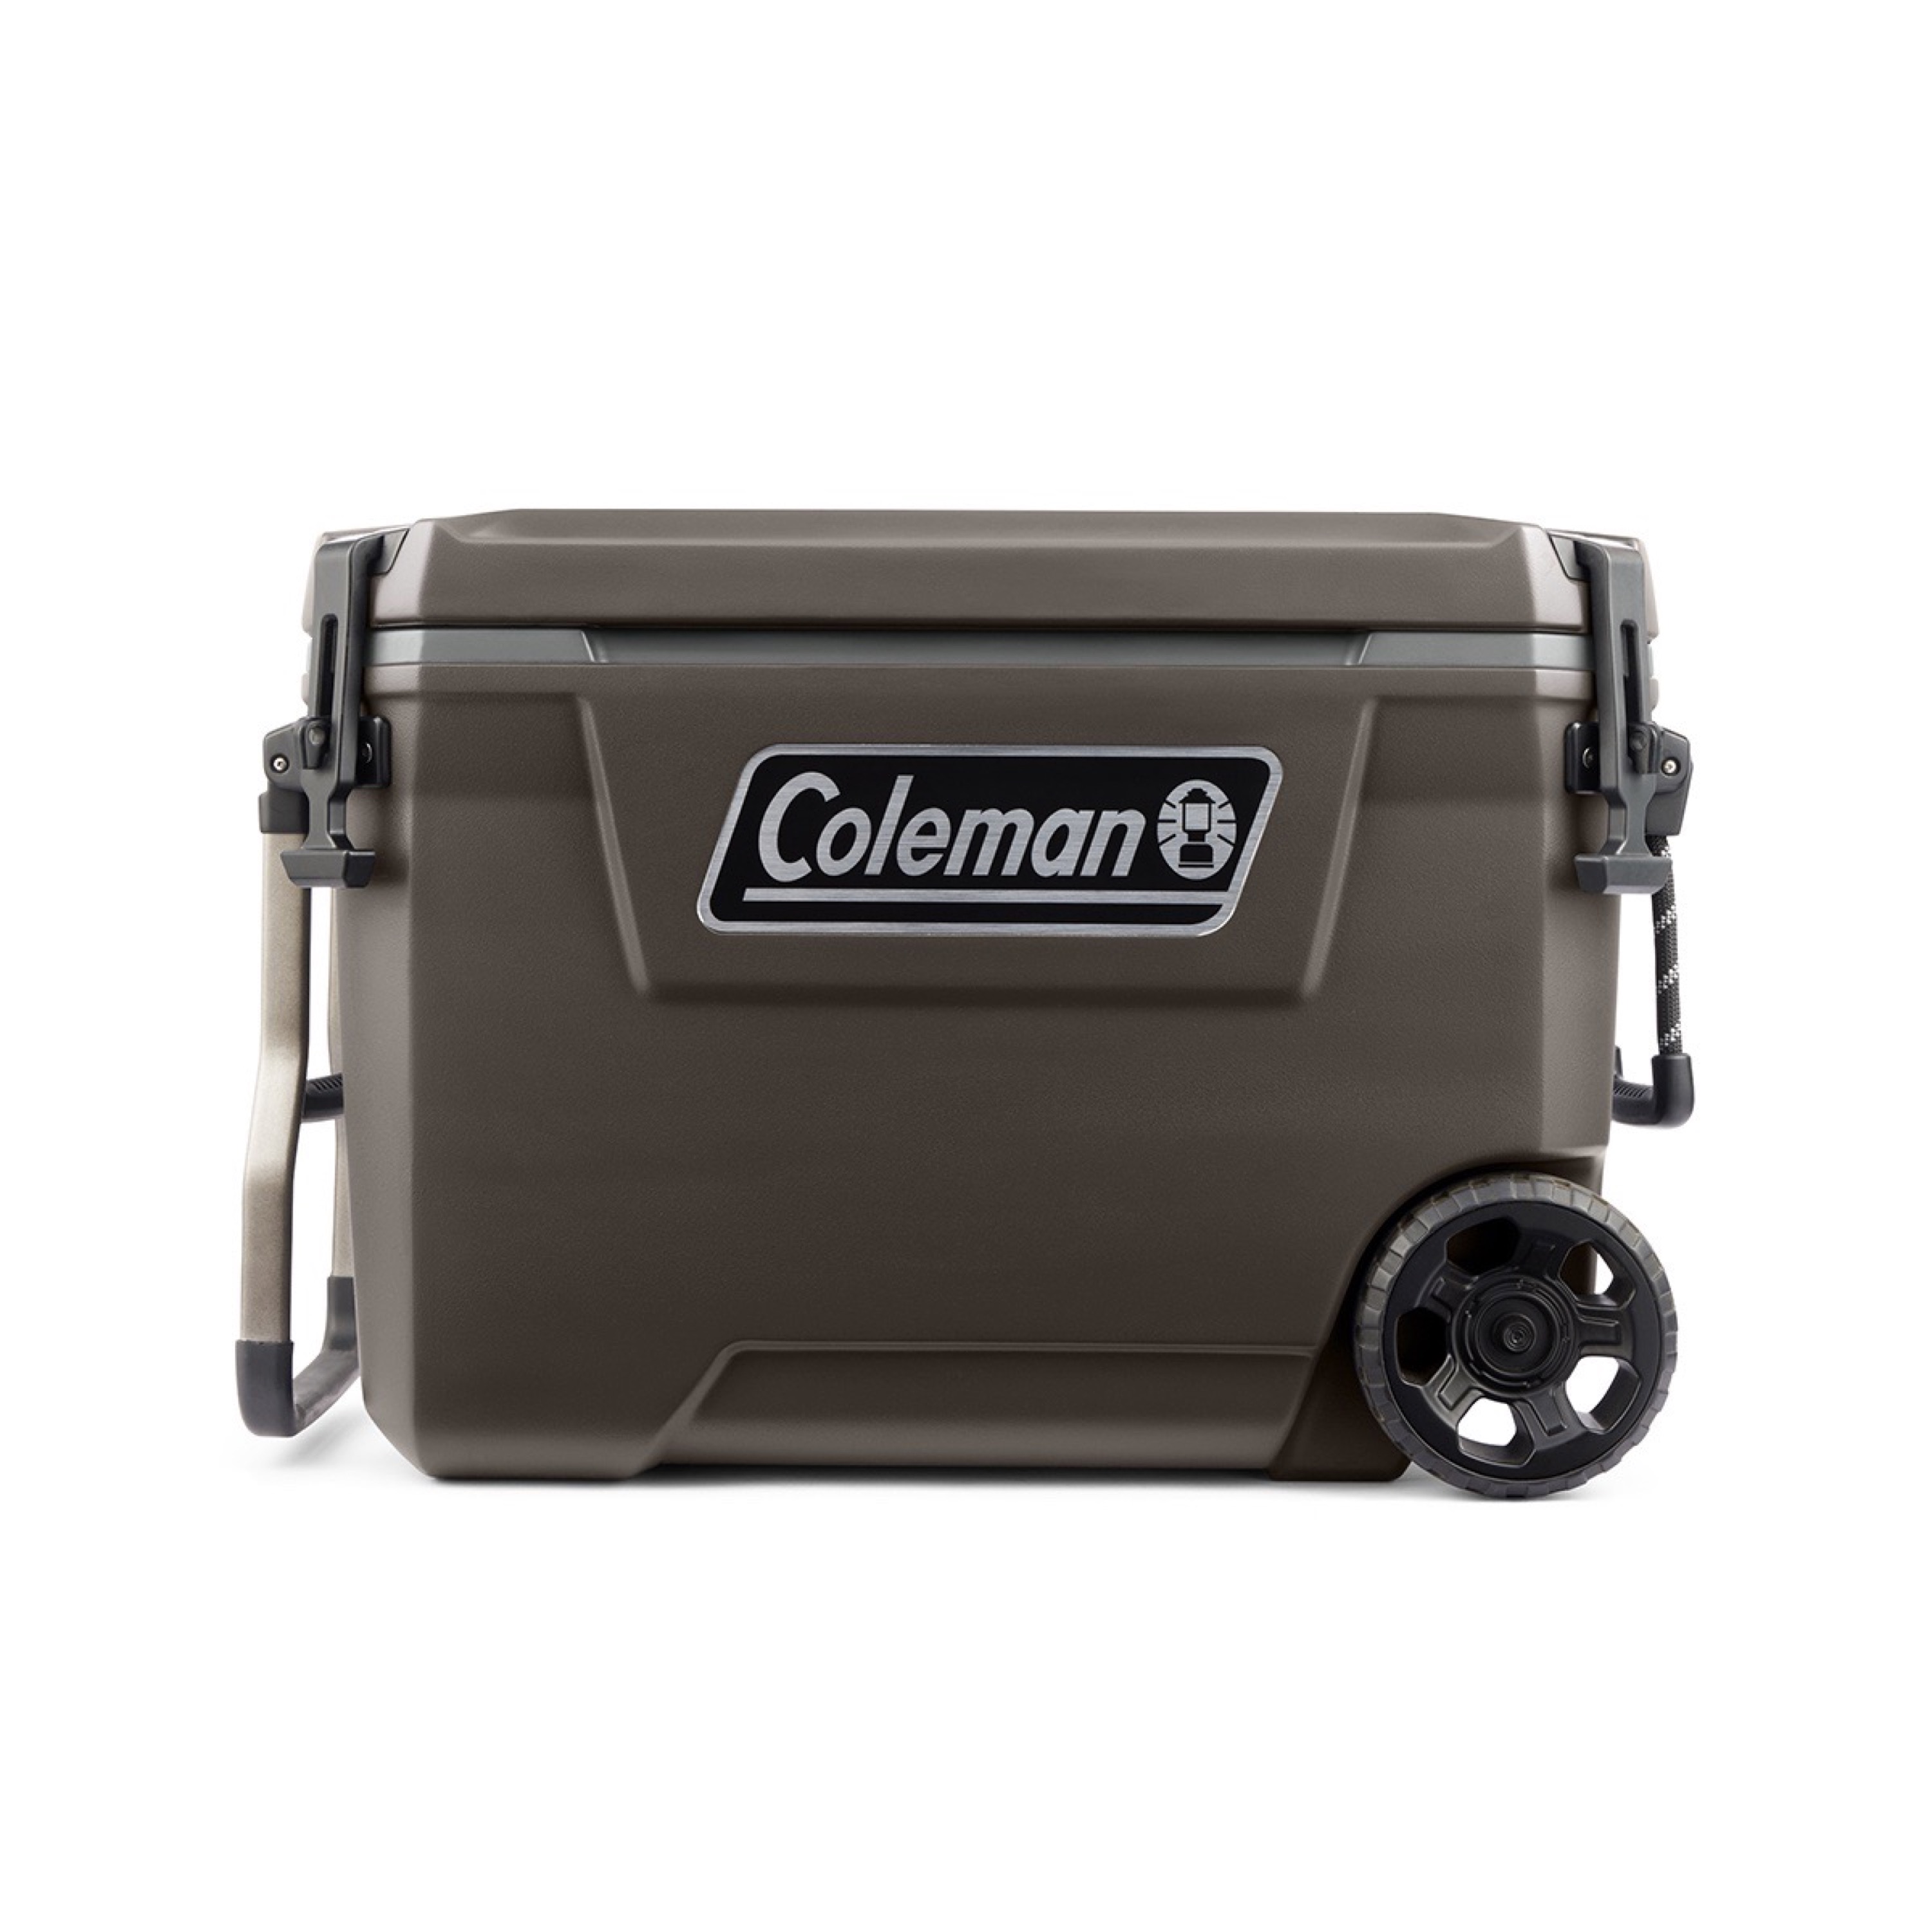 Coleman Convoy Series 65-Quart Hard Cooler with Wheels, up to 48 Cans, Brown Walnut Color - image 1 of 11